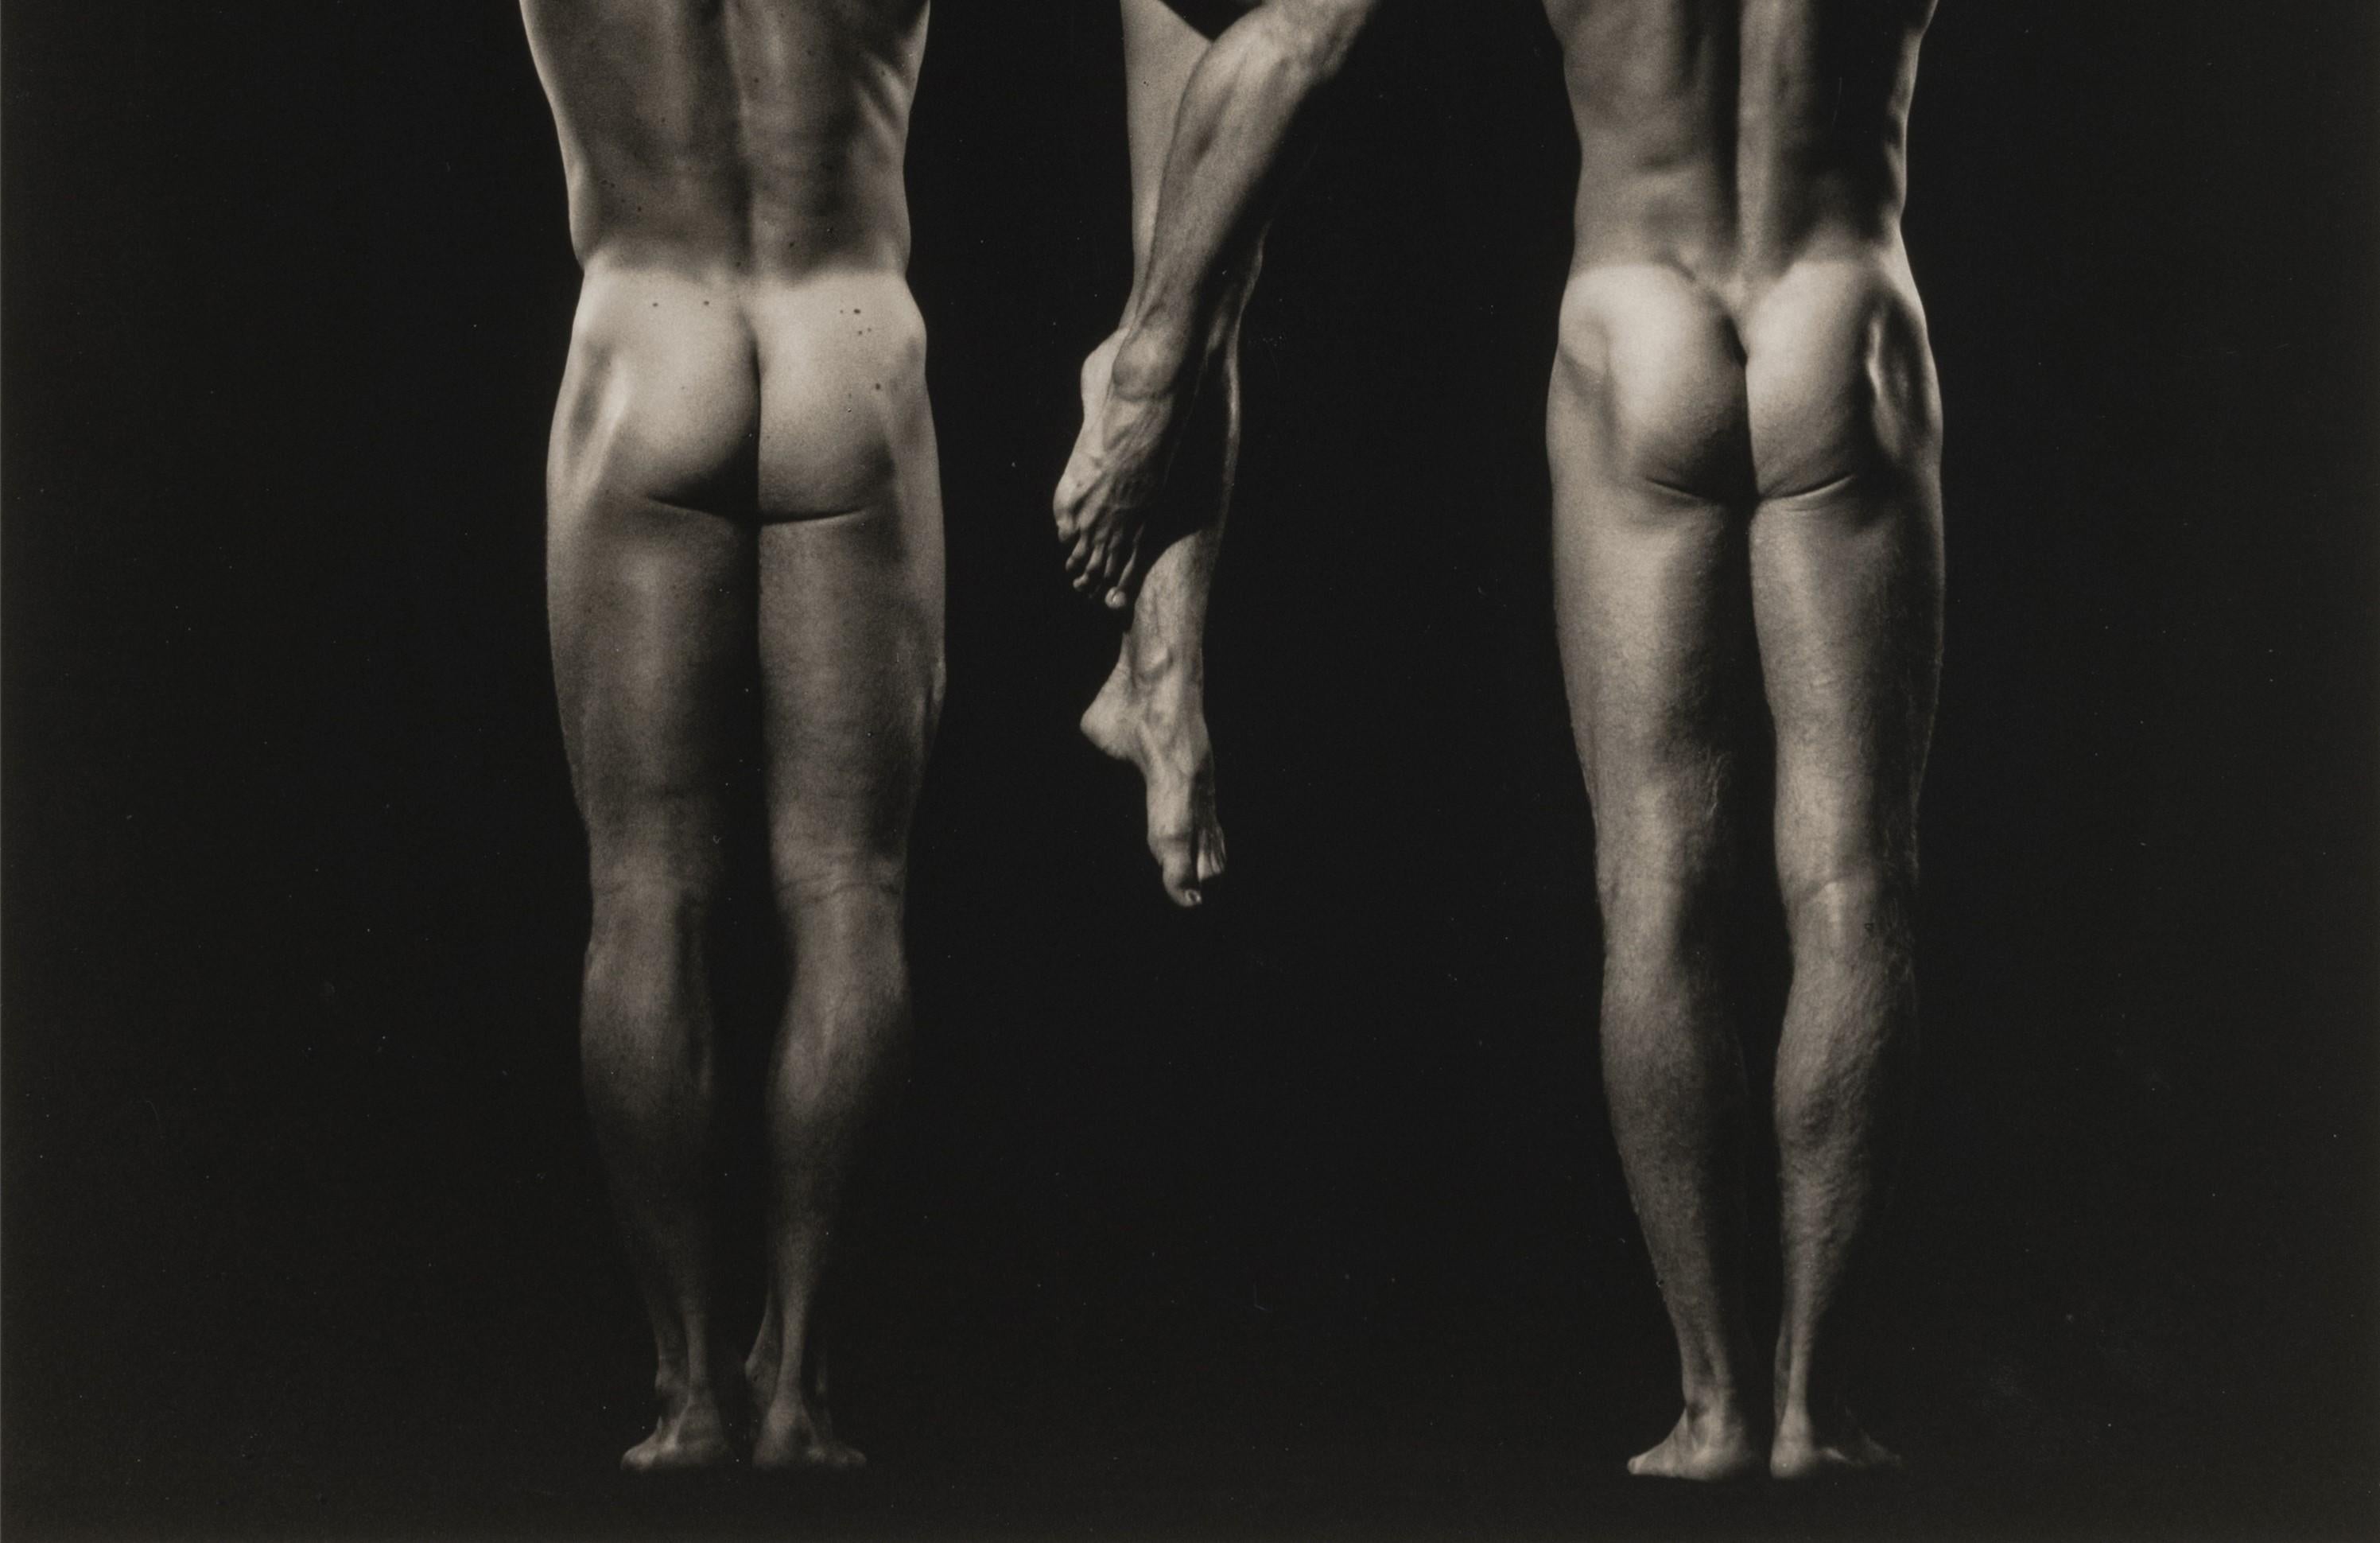 National Danish Gymnastics Team: Earth #4 - Black Nude Photograph by Anderson and Low